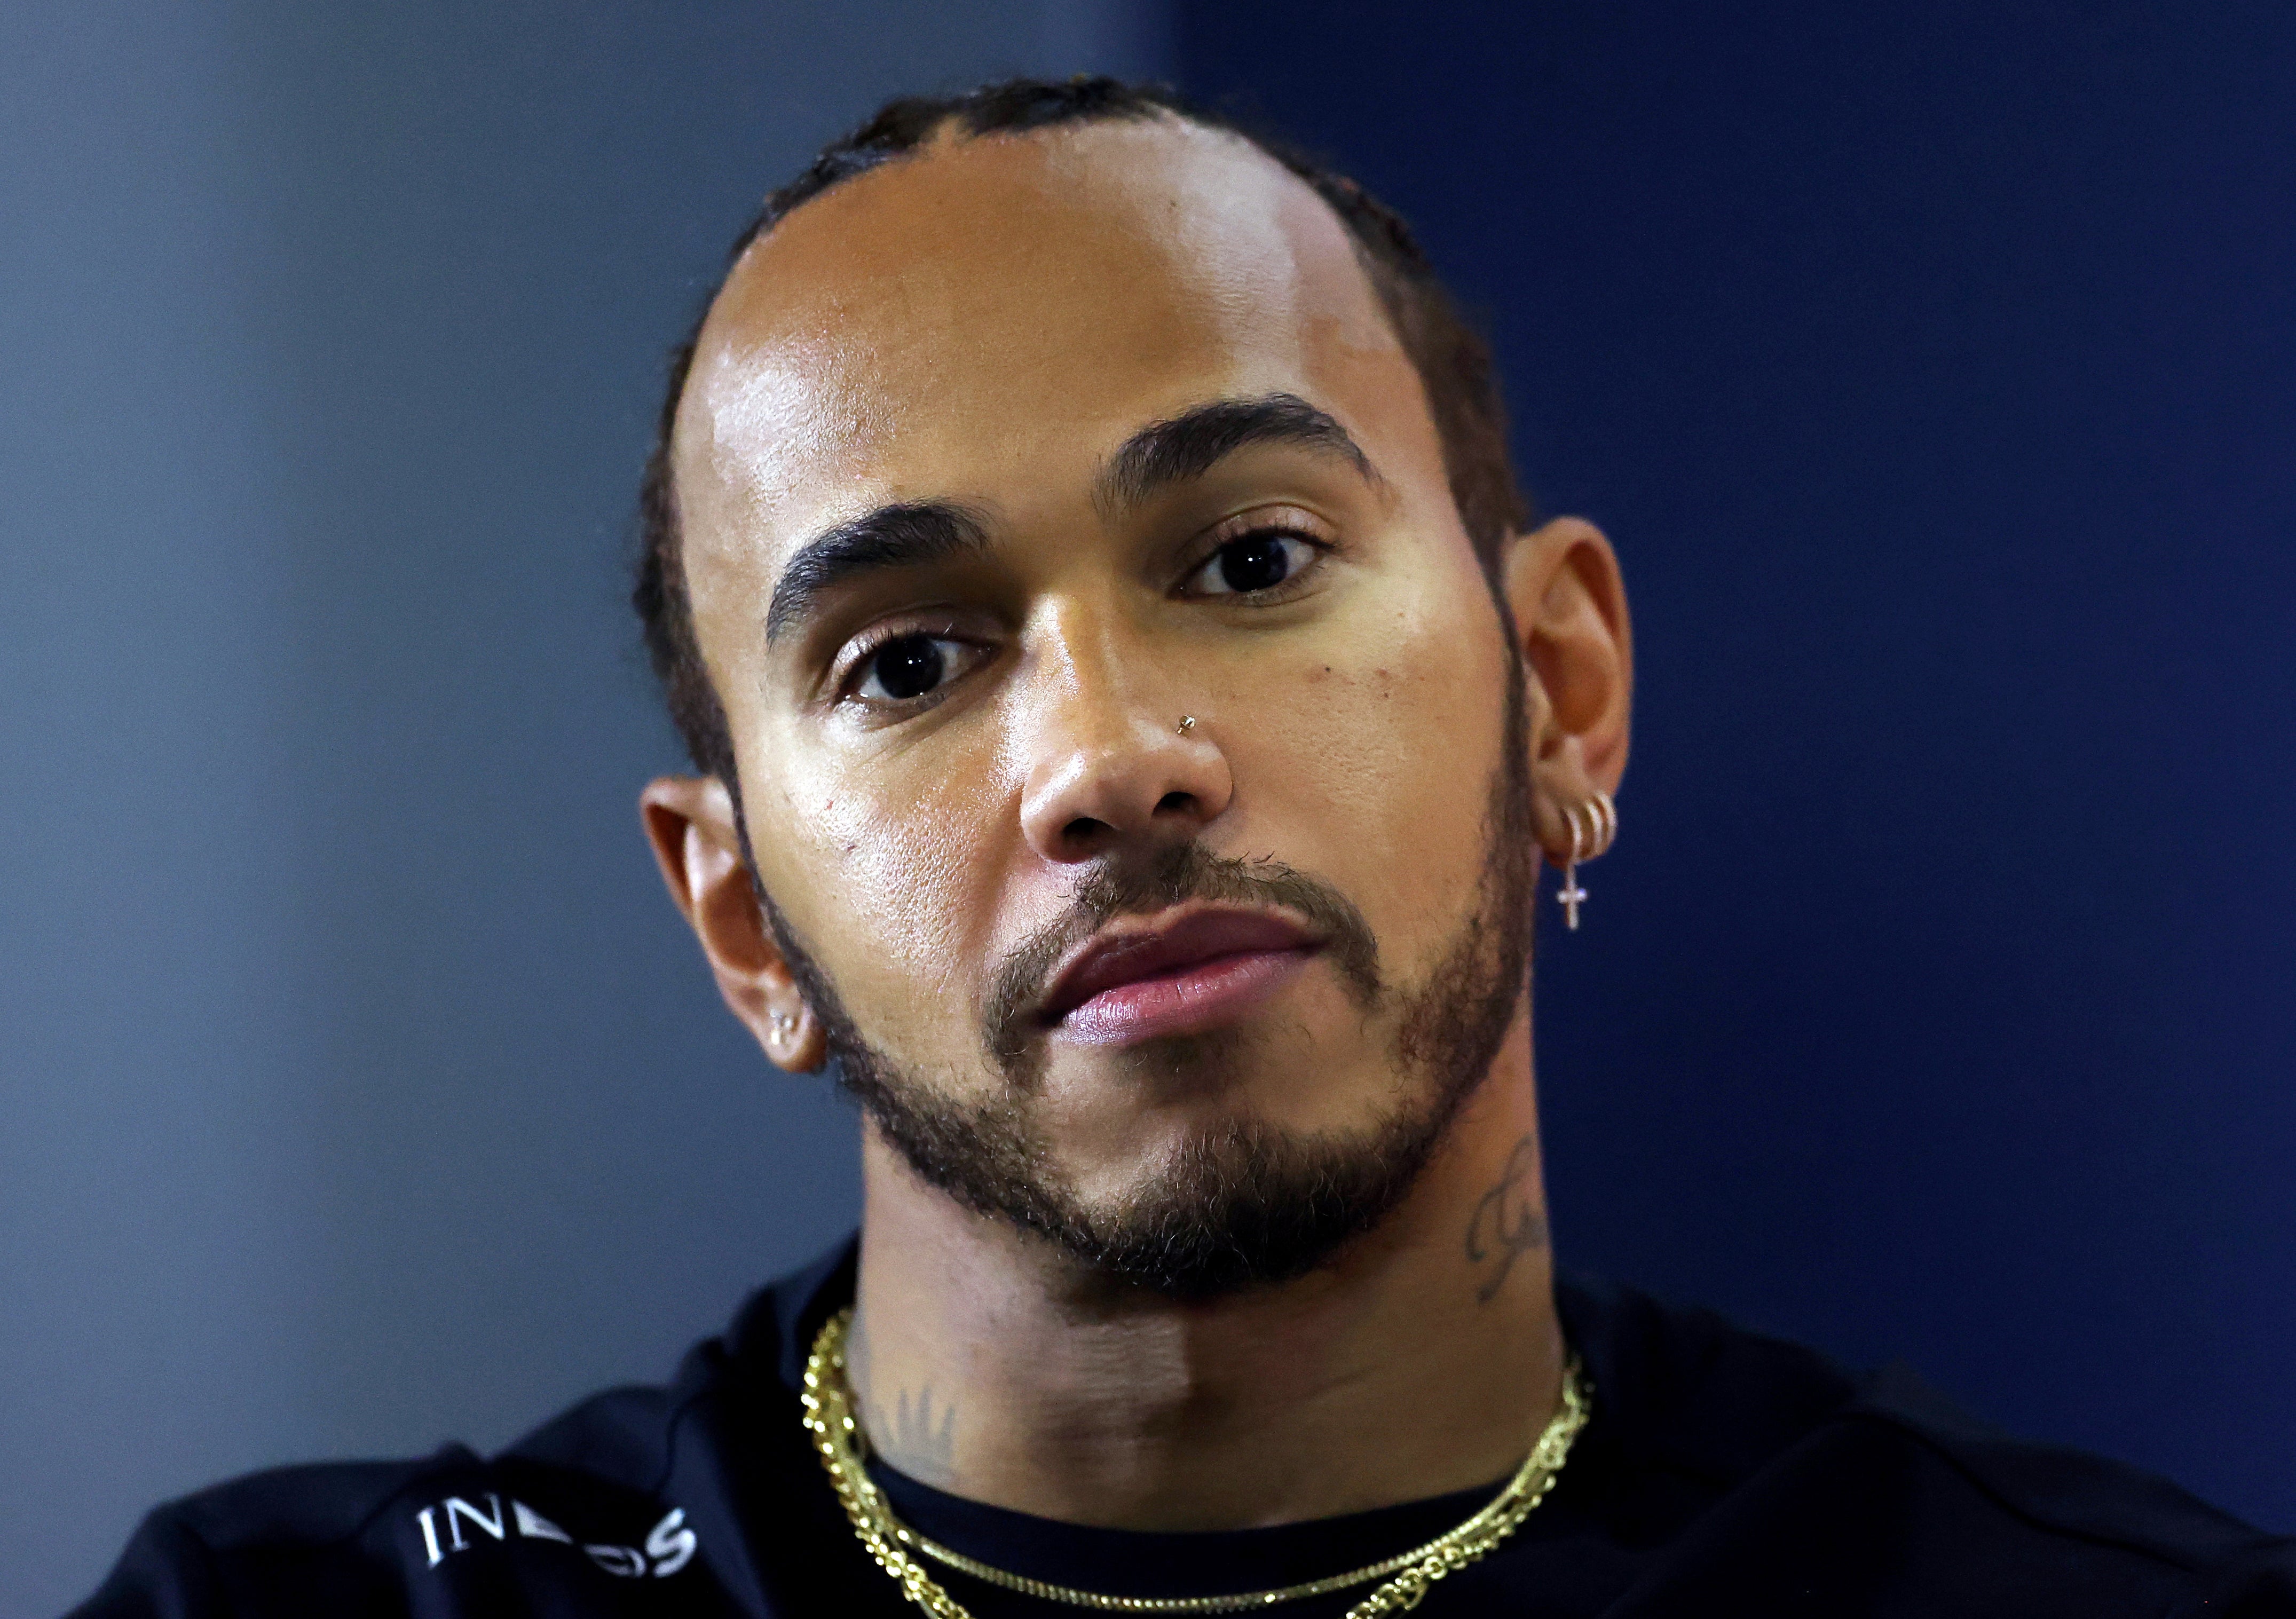 Lewis Hamilton has previously paid tribute to those affected by the Grenfell tragedy (PA)